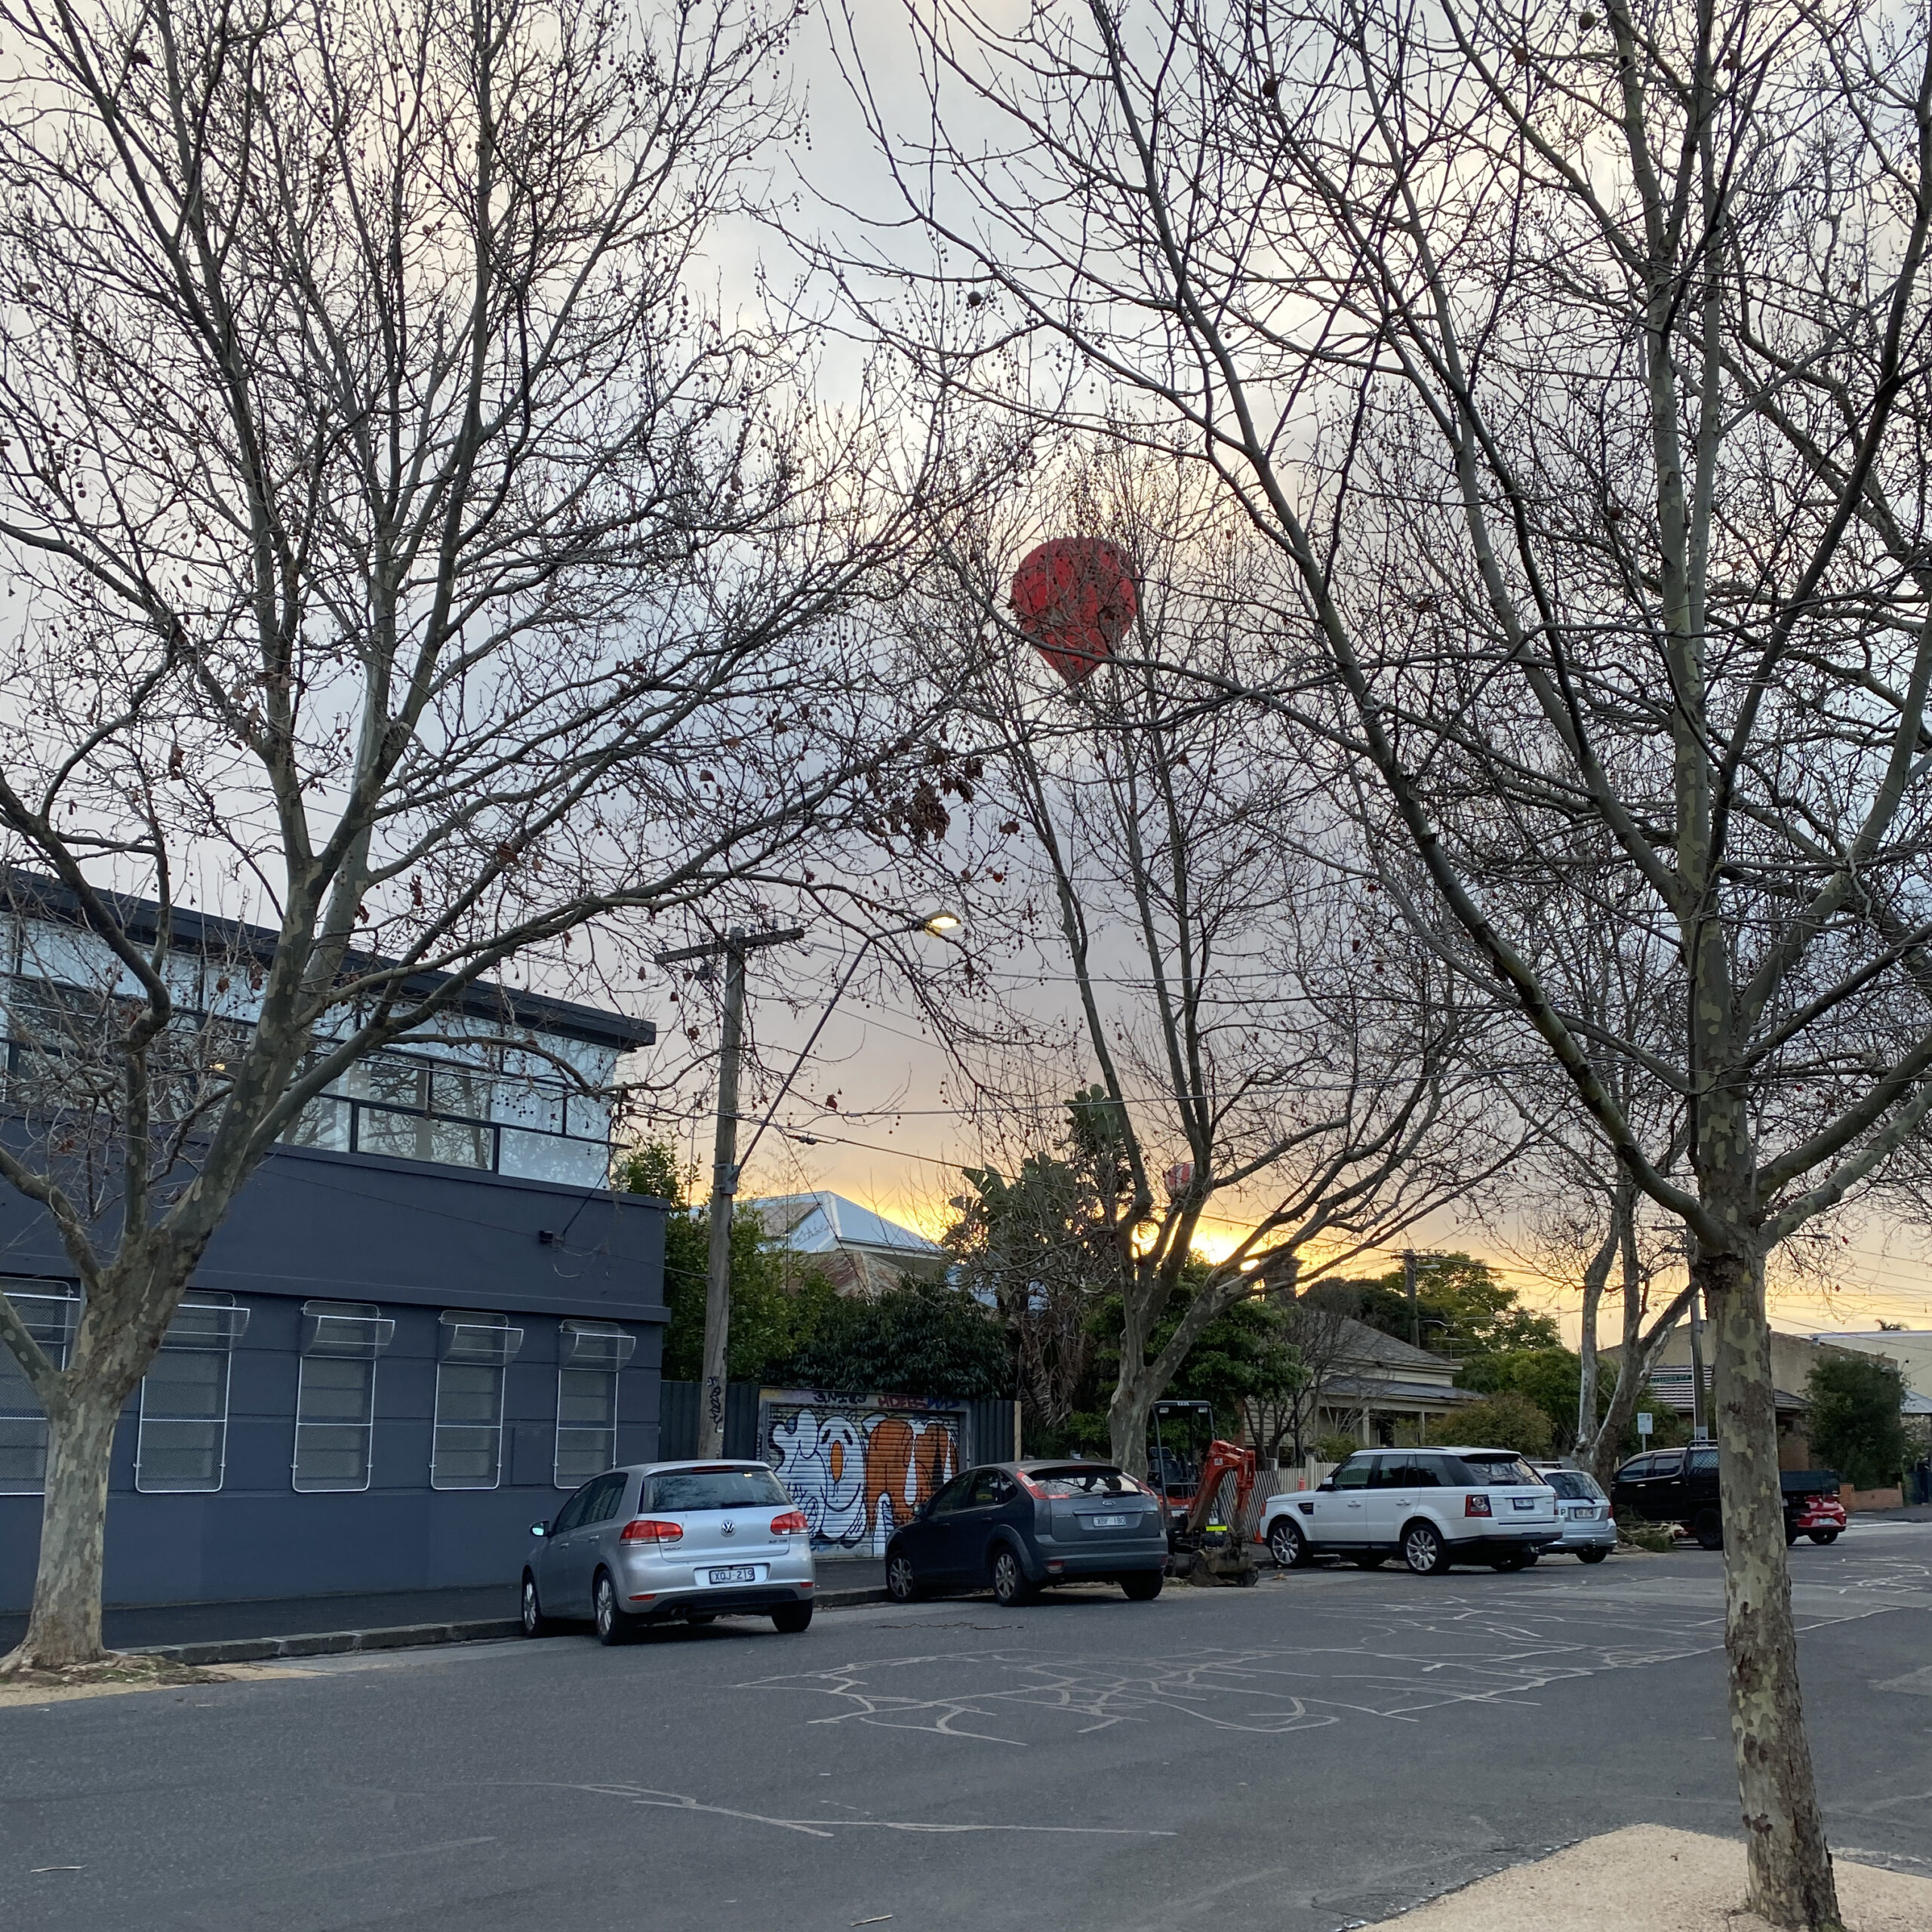 walking around collingwood today - 5th august 2023 - two hot air balloons in the sky - a red one and a red and white striped through the dawn light!